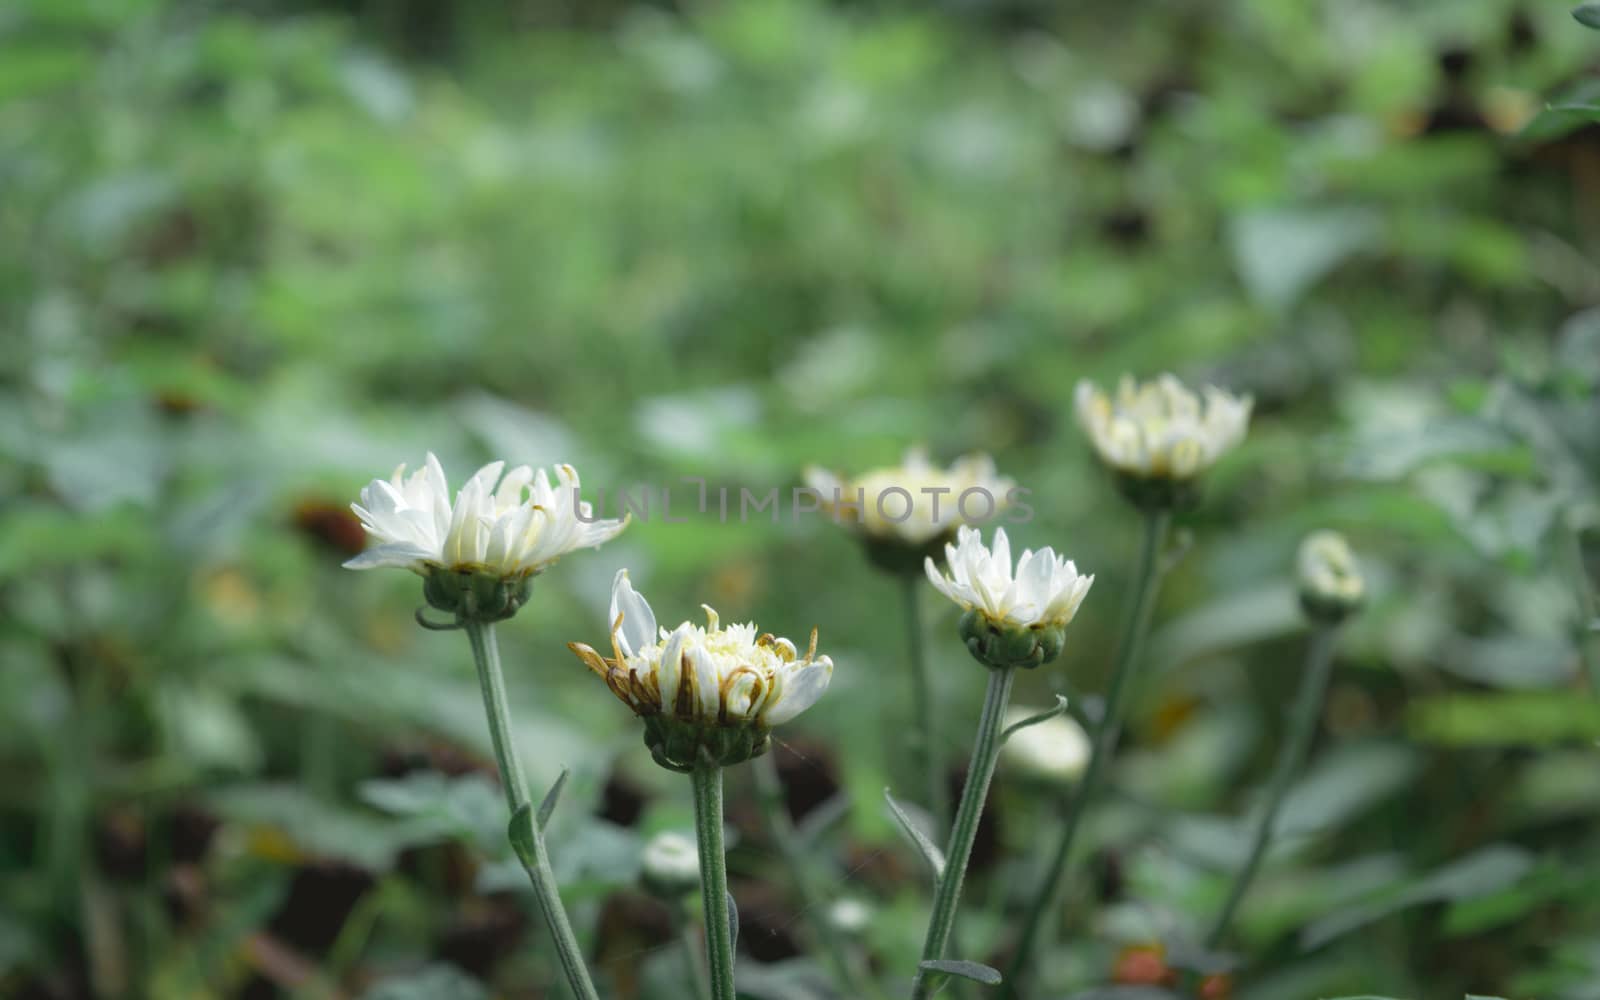 Closeup beautiful small cute flower of yellow pollen and white petal of Common Daisy, Lawn Daisy, Bellis Perennis, Woundwort, Bruisewort or English Daisy variegated foliage spot in rural environment. Shibpur Howrah botanical garden West Bengal India South Asia Pacific. by sudiptabhowmick